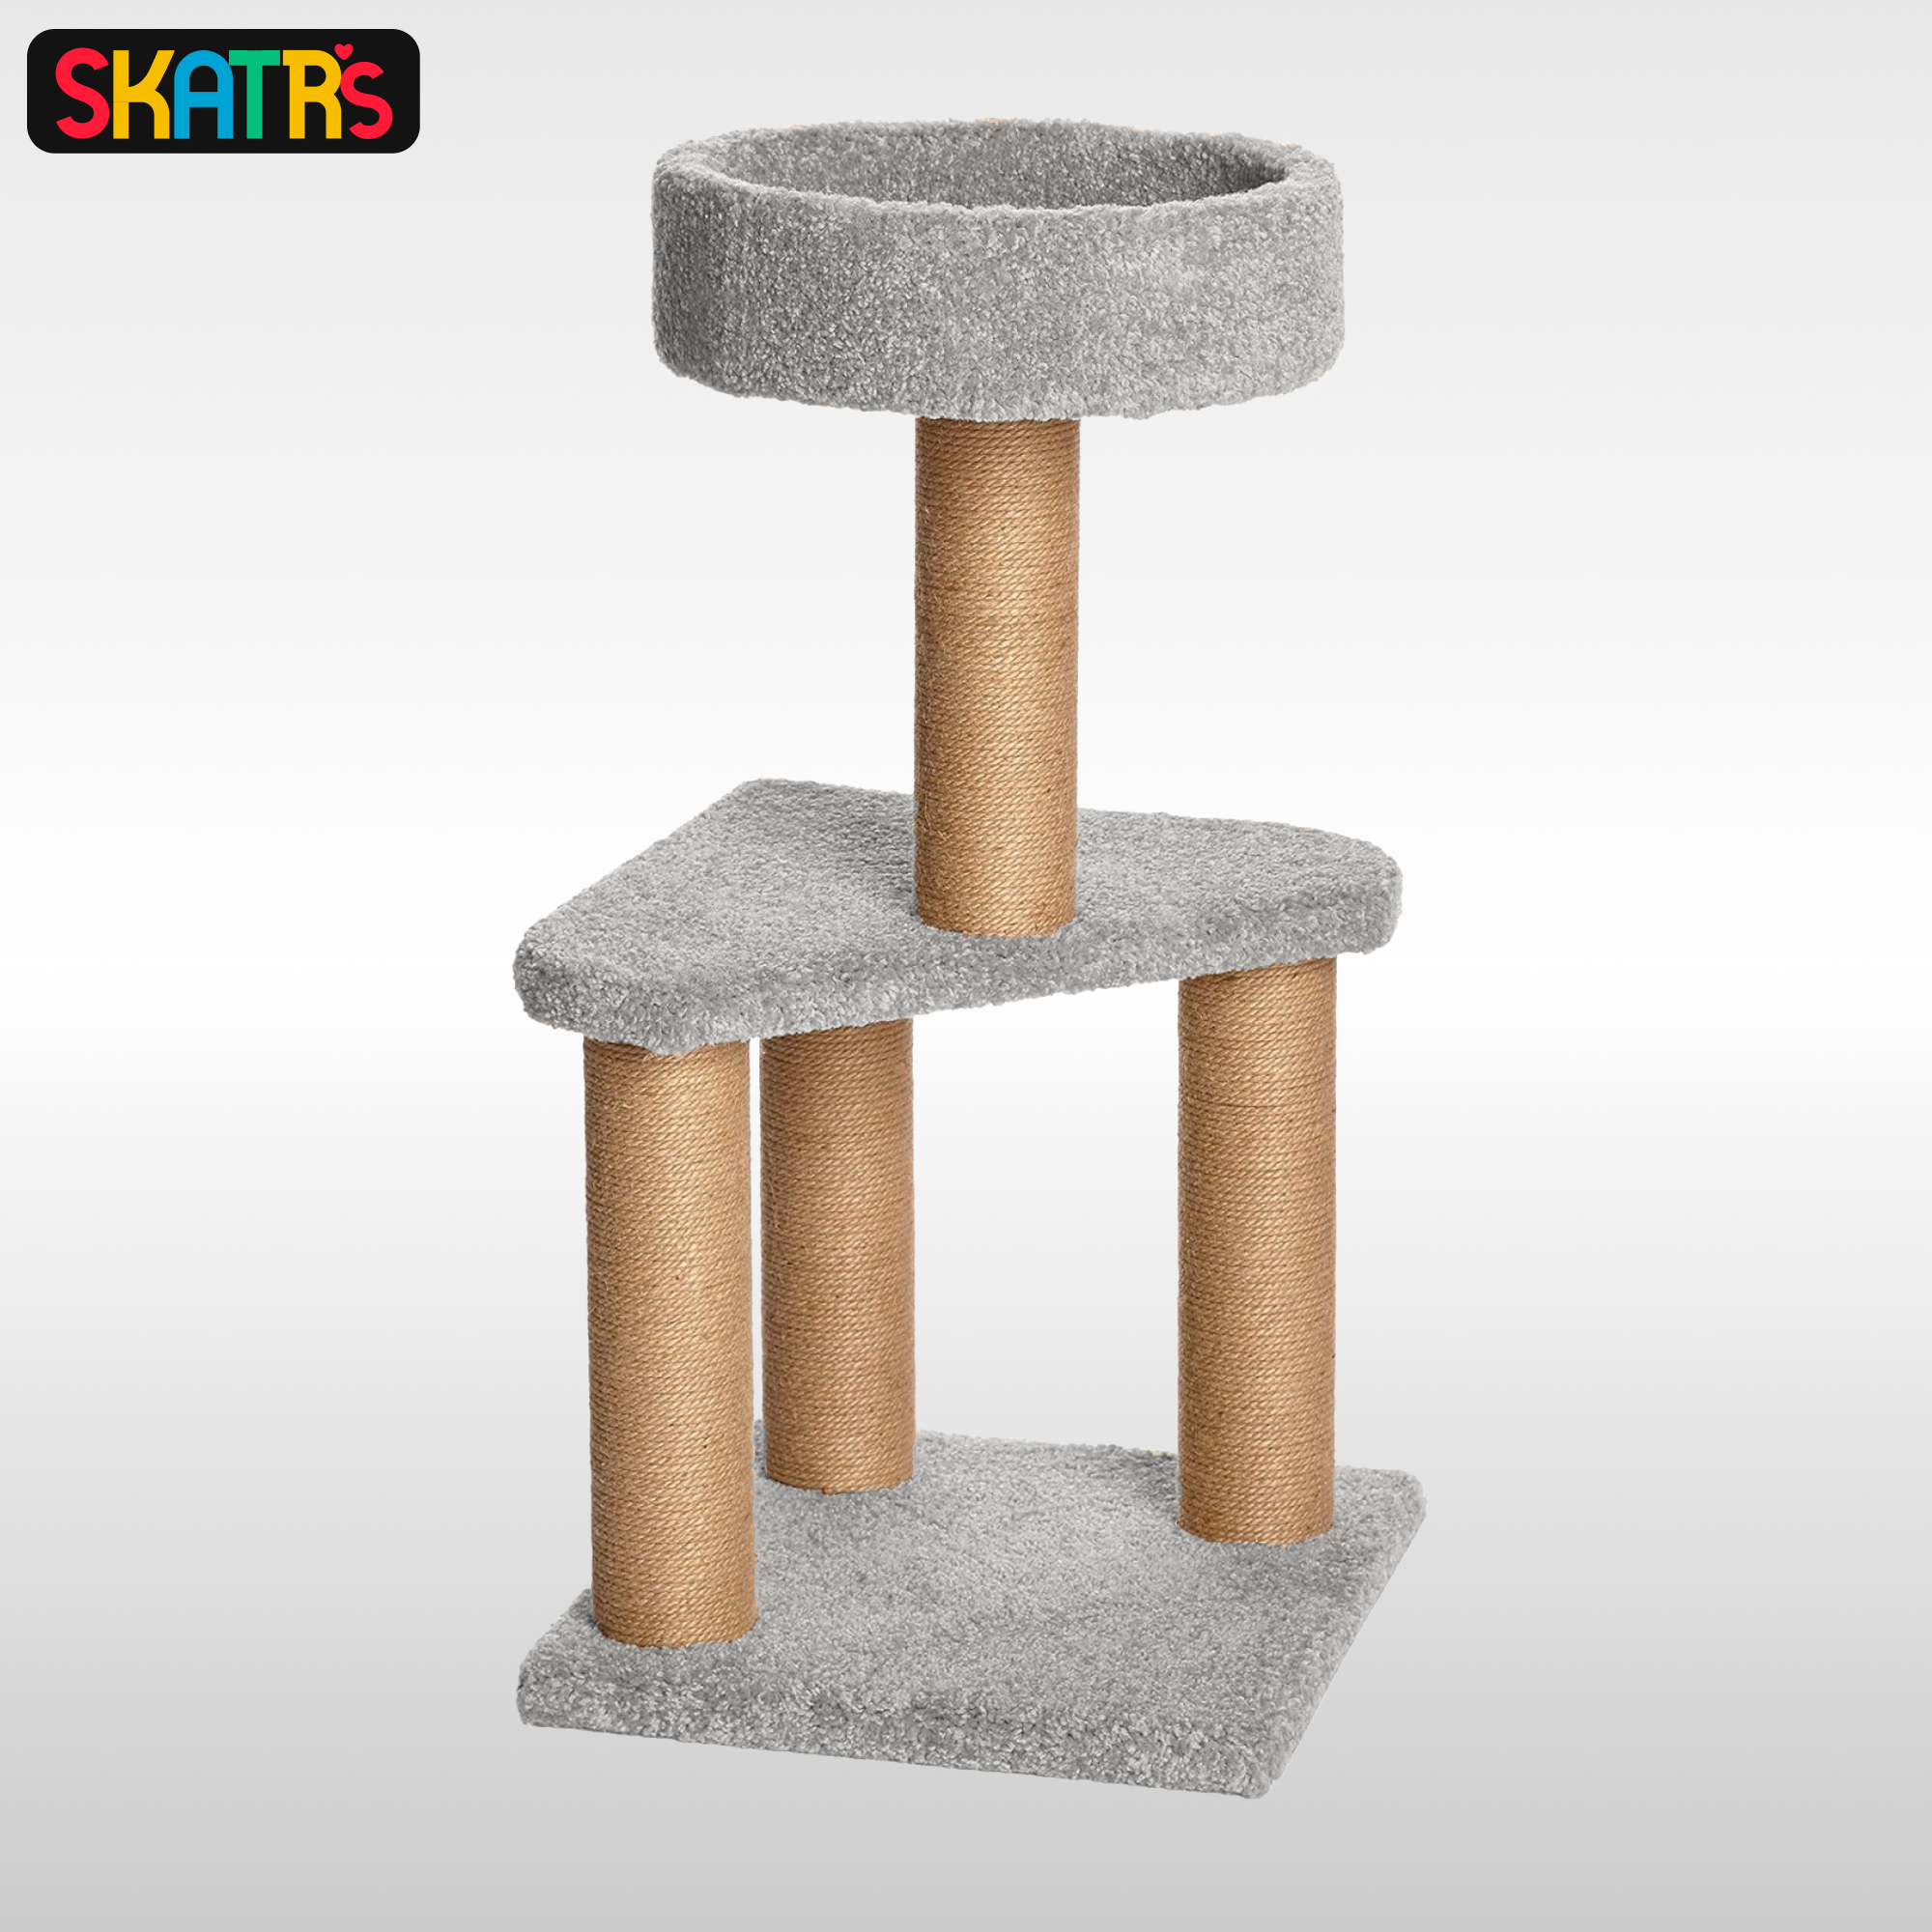 Skatrs Feline Fortress Two Tier Cat Tree with Sisal Post Toy